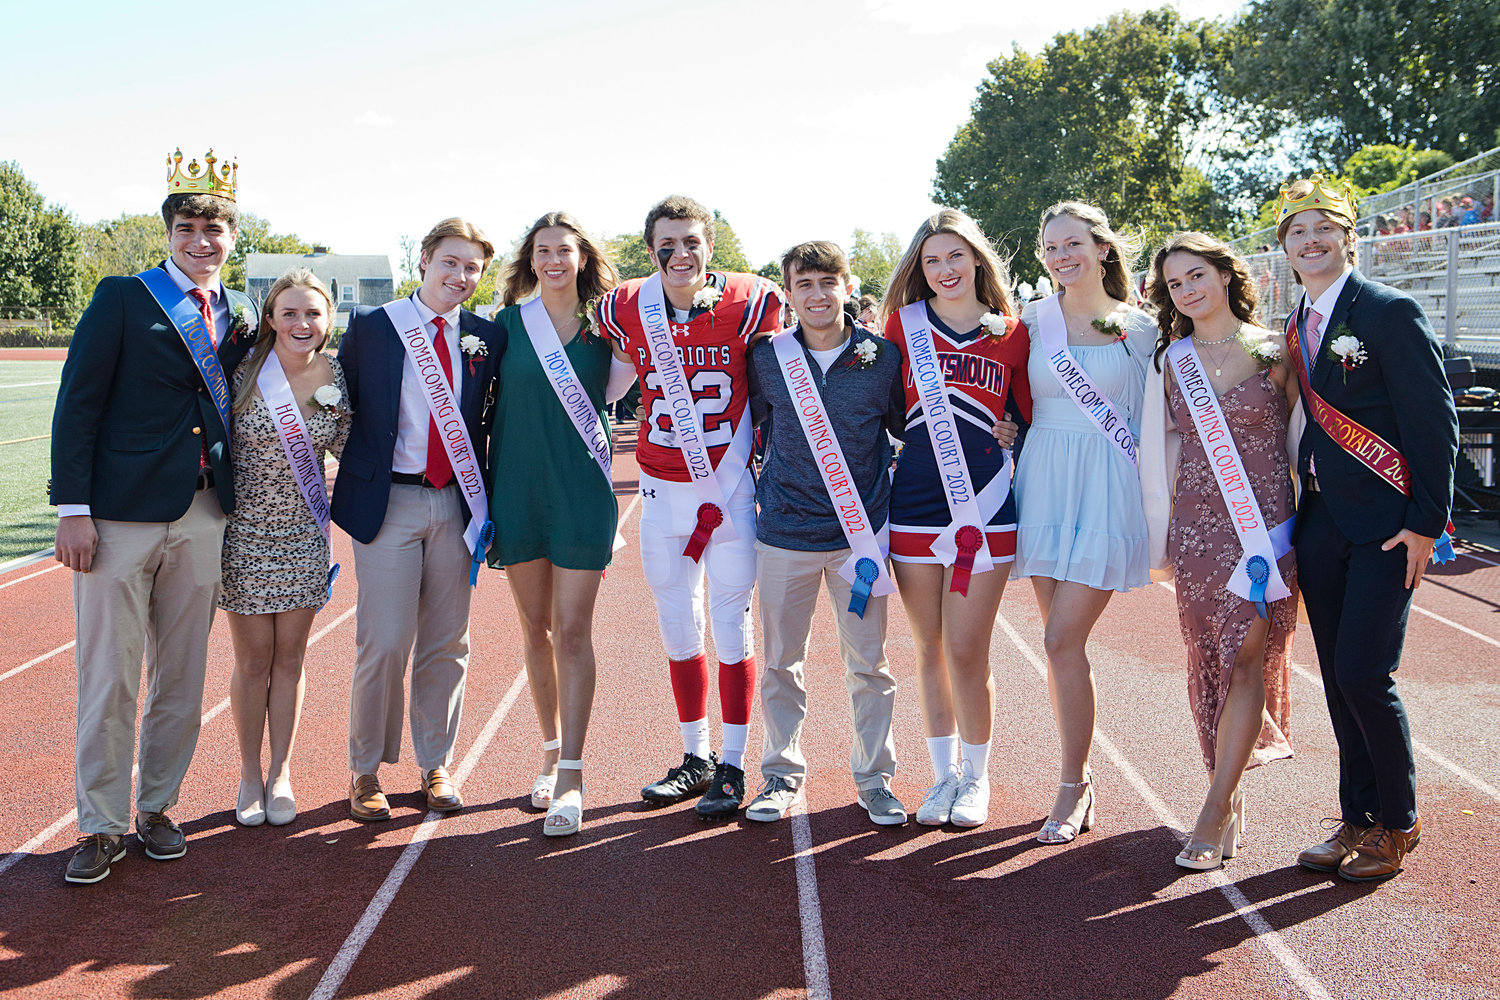 Posing for a photo on the track before the game are Homecoming Court members (from left) Luke Carlin, Elise Kirwin, Jack Hollen, Ava Hackley, Dylan Brandariz, Andrew Alvanas, Phoebe Tavares, Avery Snyder, Morgan Leverault, and Nick Waycuilis.